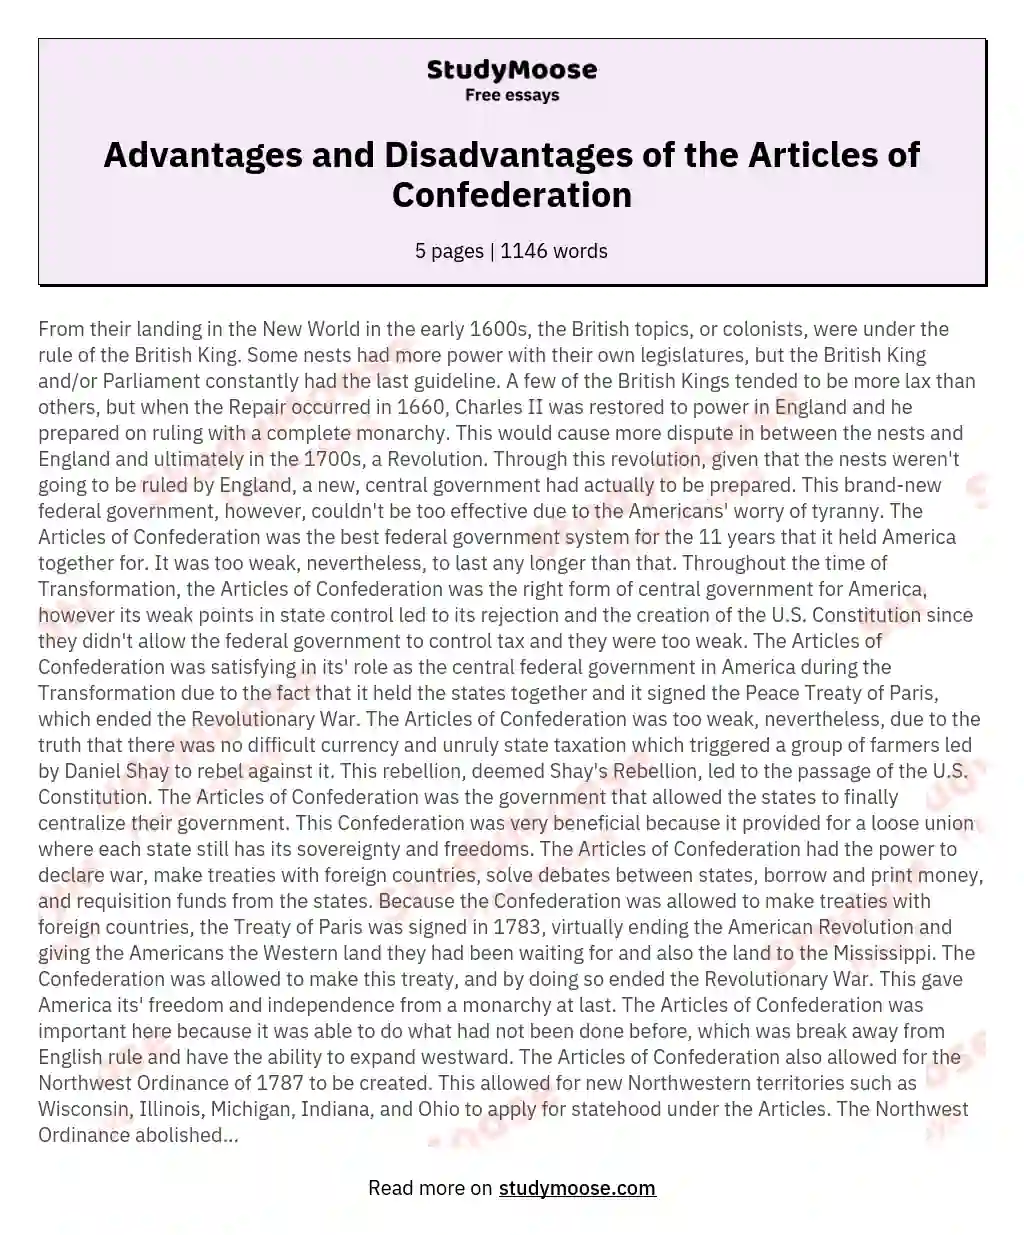 Advantages and Disadvantages of the Articles of Confederation essay